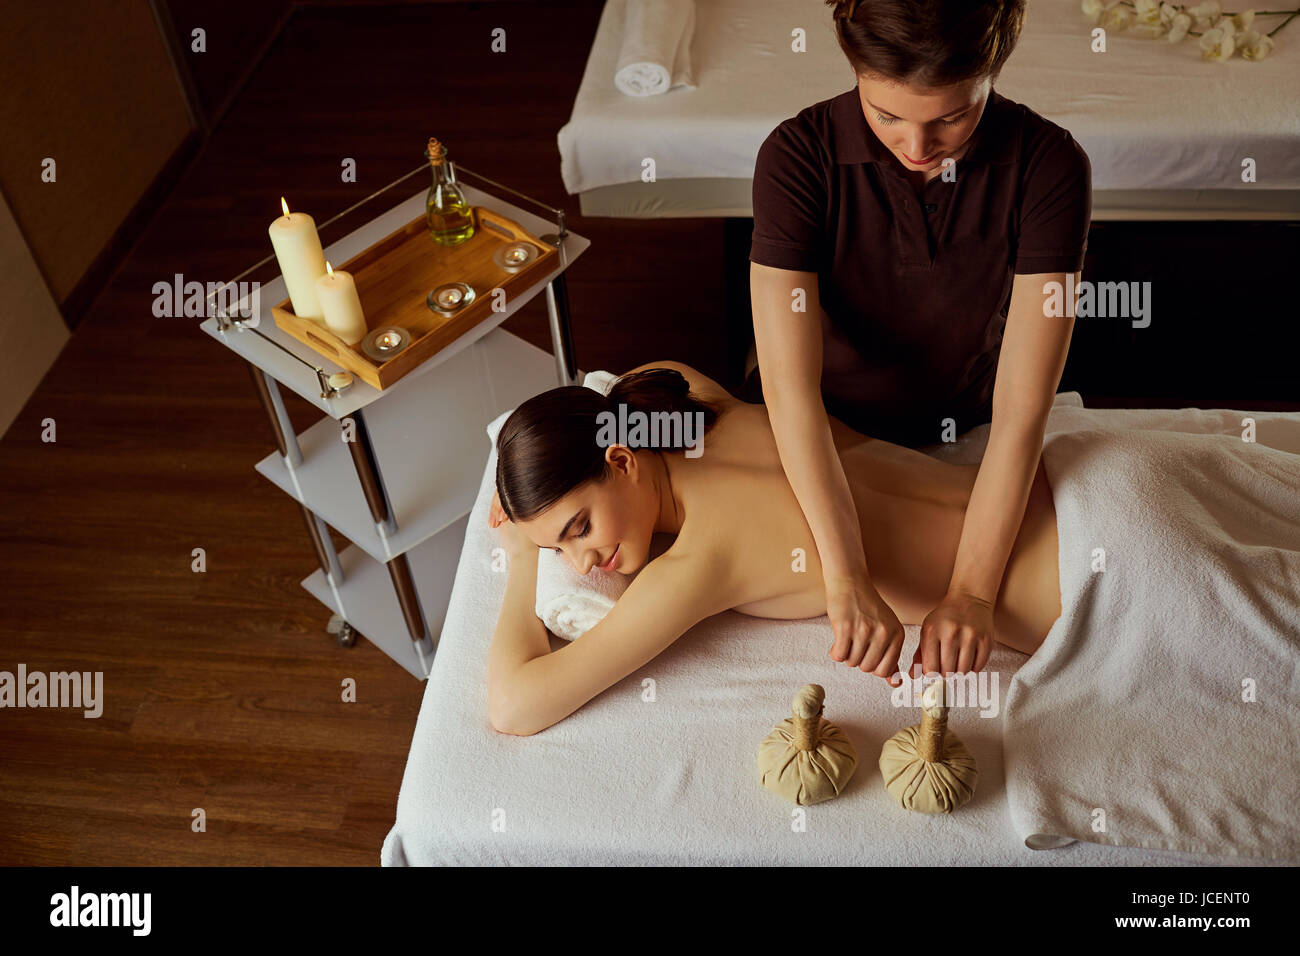 Massage of young woman lying in spa salon Stock Photo